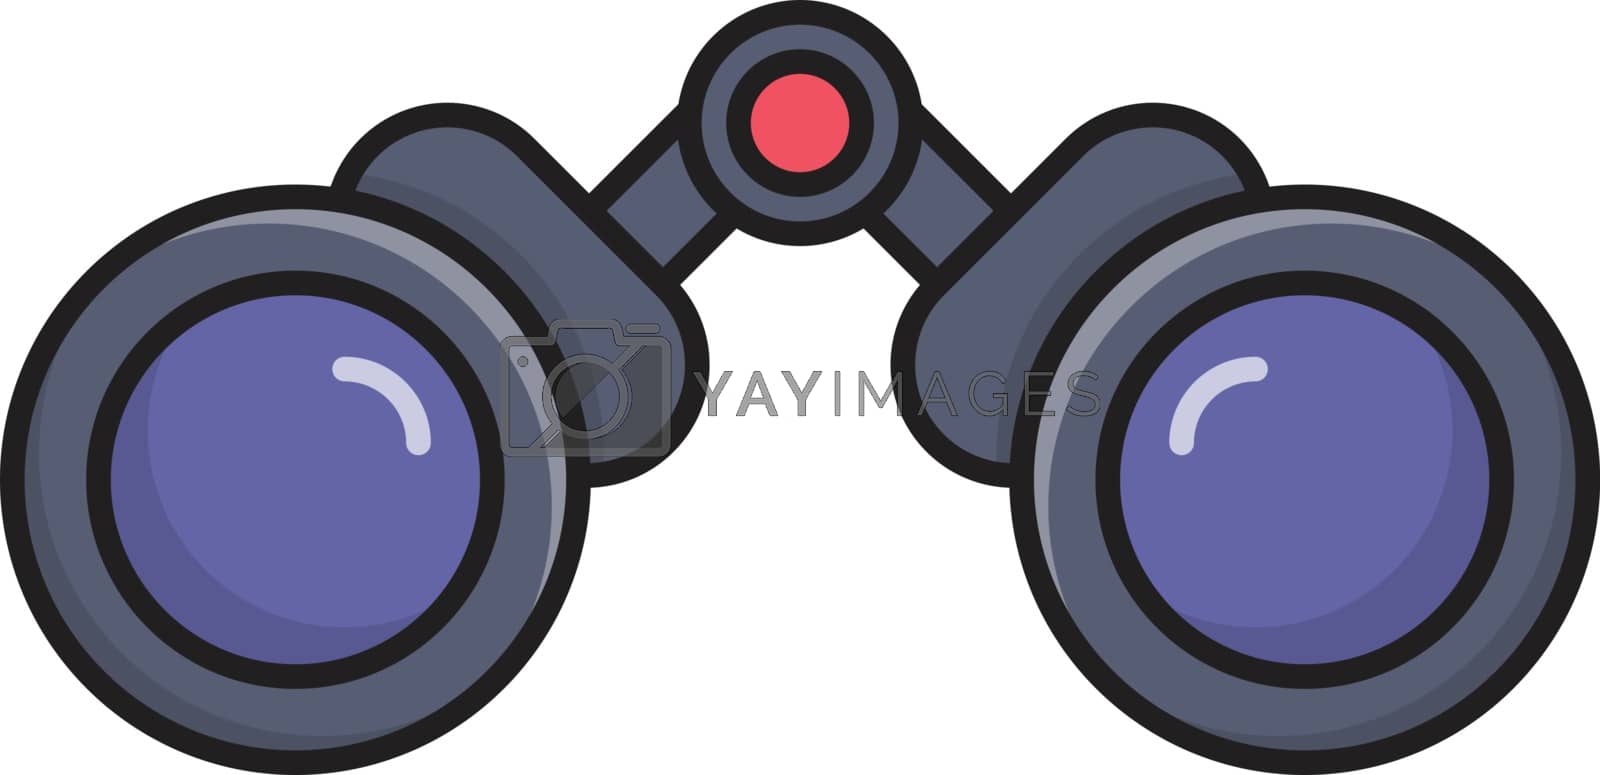 Royalty free image of spy by vectorstall